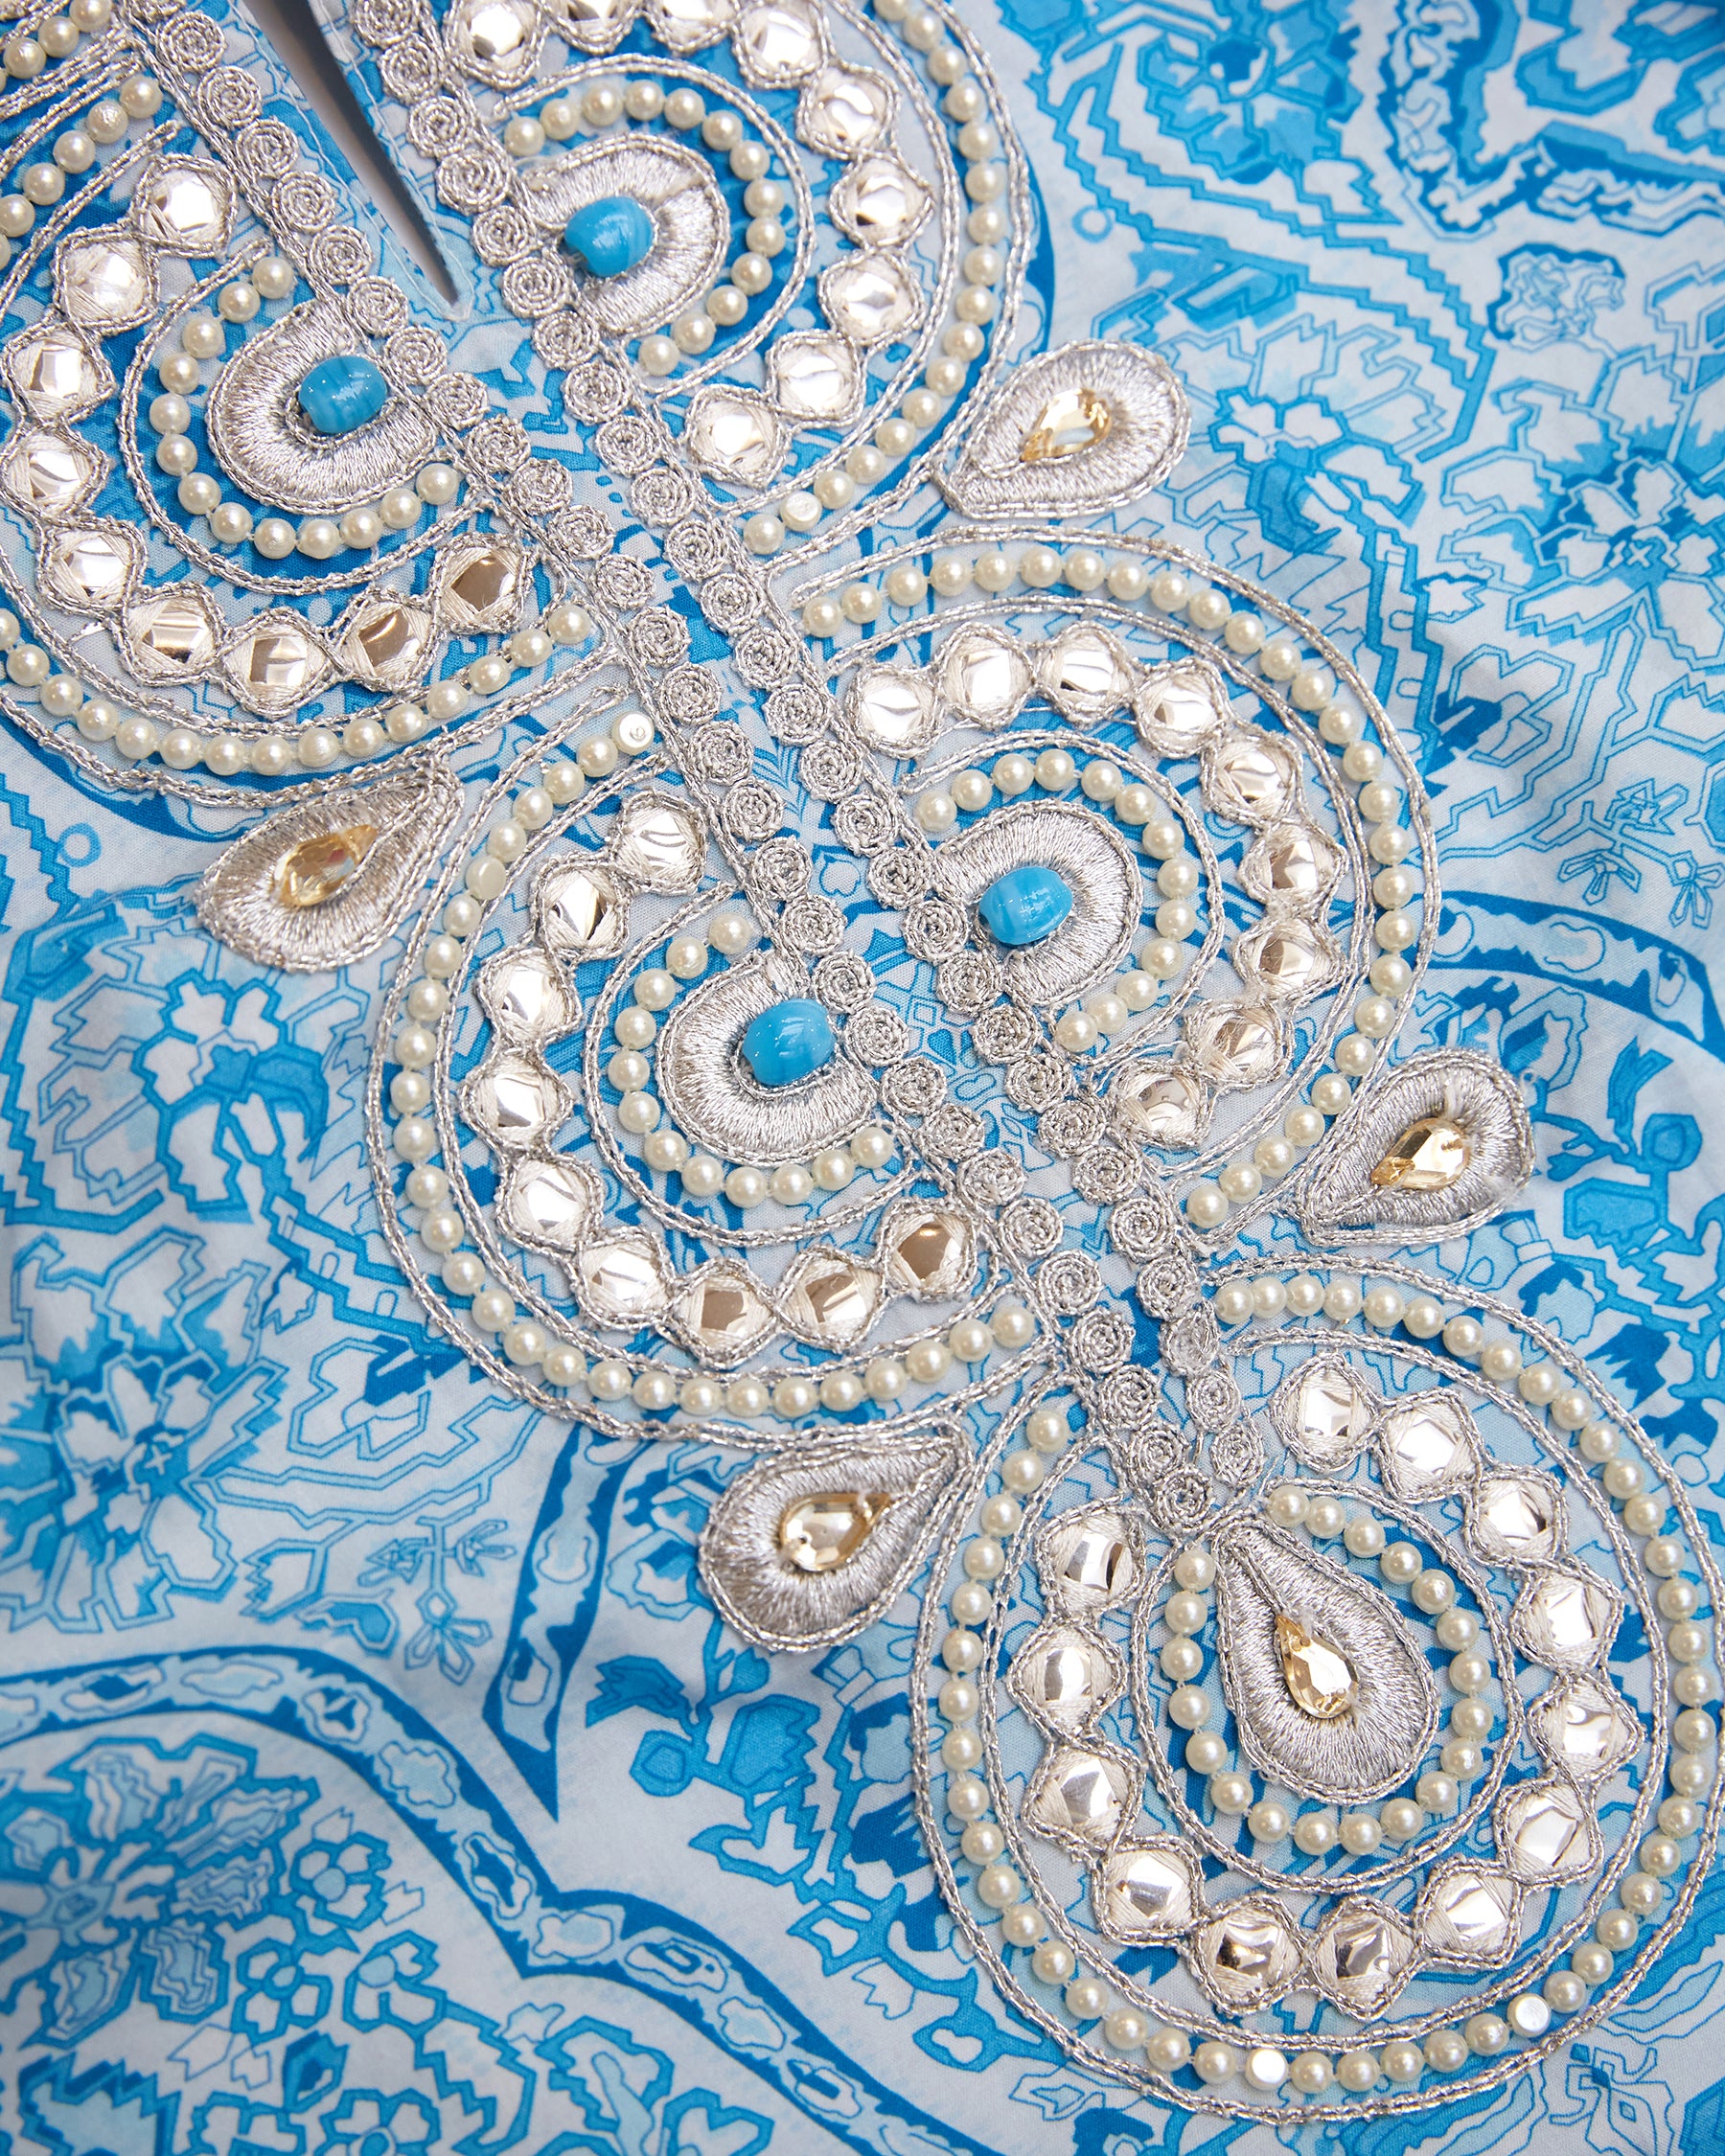 Noor Long Tunic Dress in Turquoise Paisley and Silver Embellishment-Detail of neckline embellishment